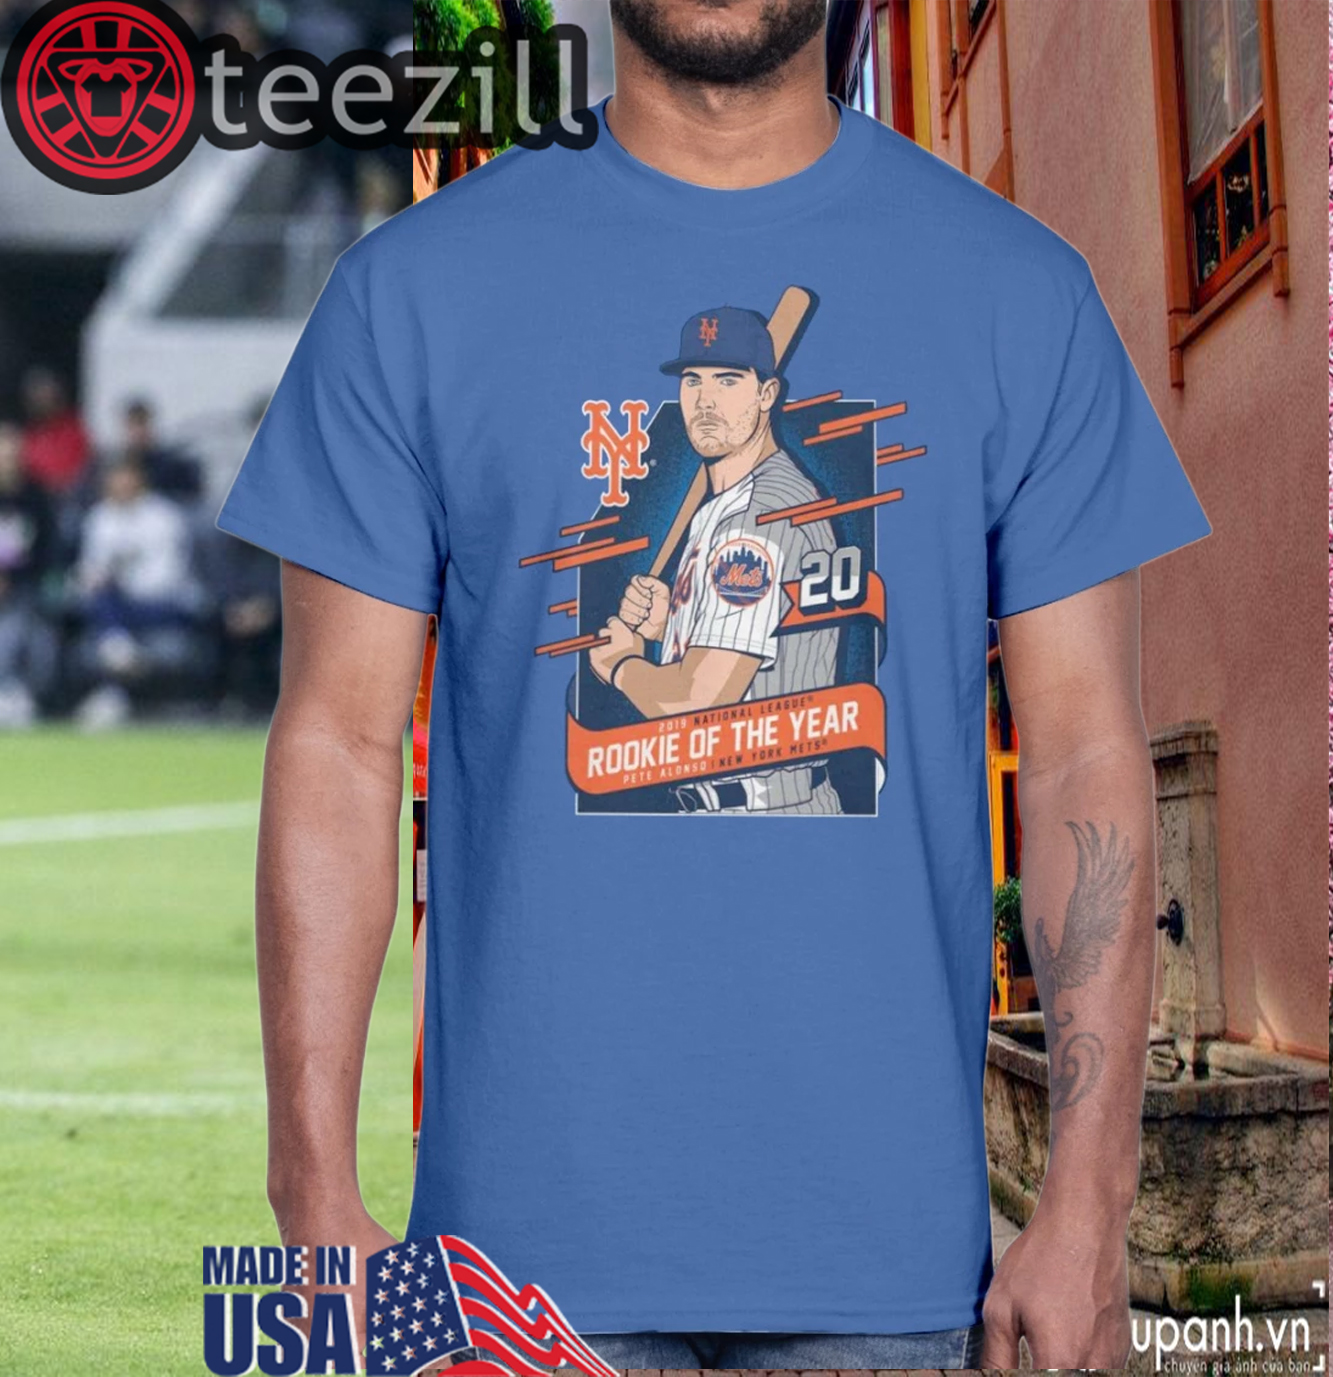 pete alonso rookie of the year shirt